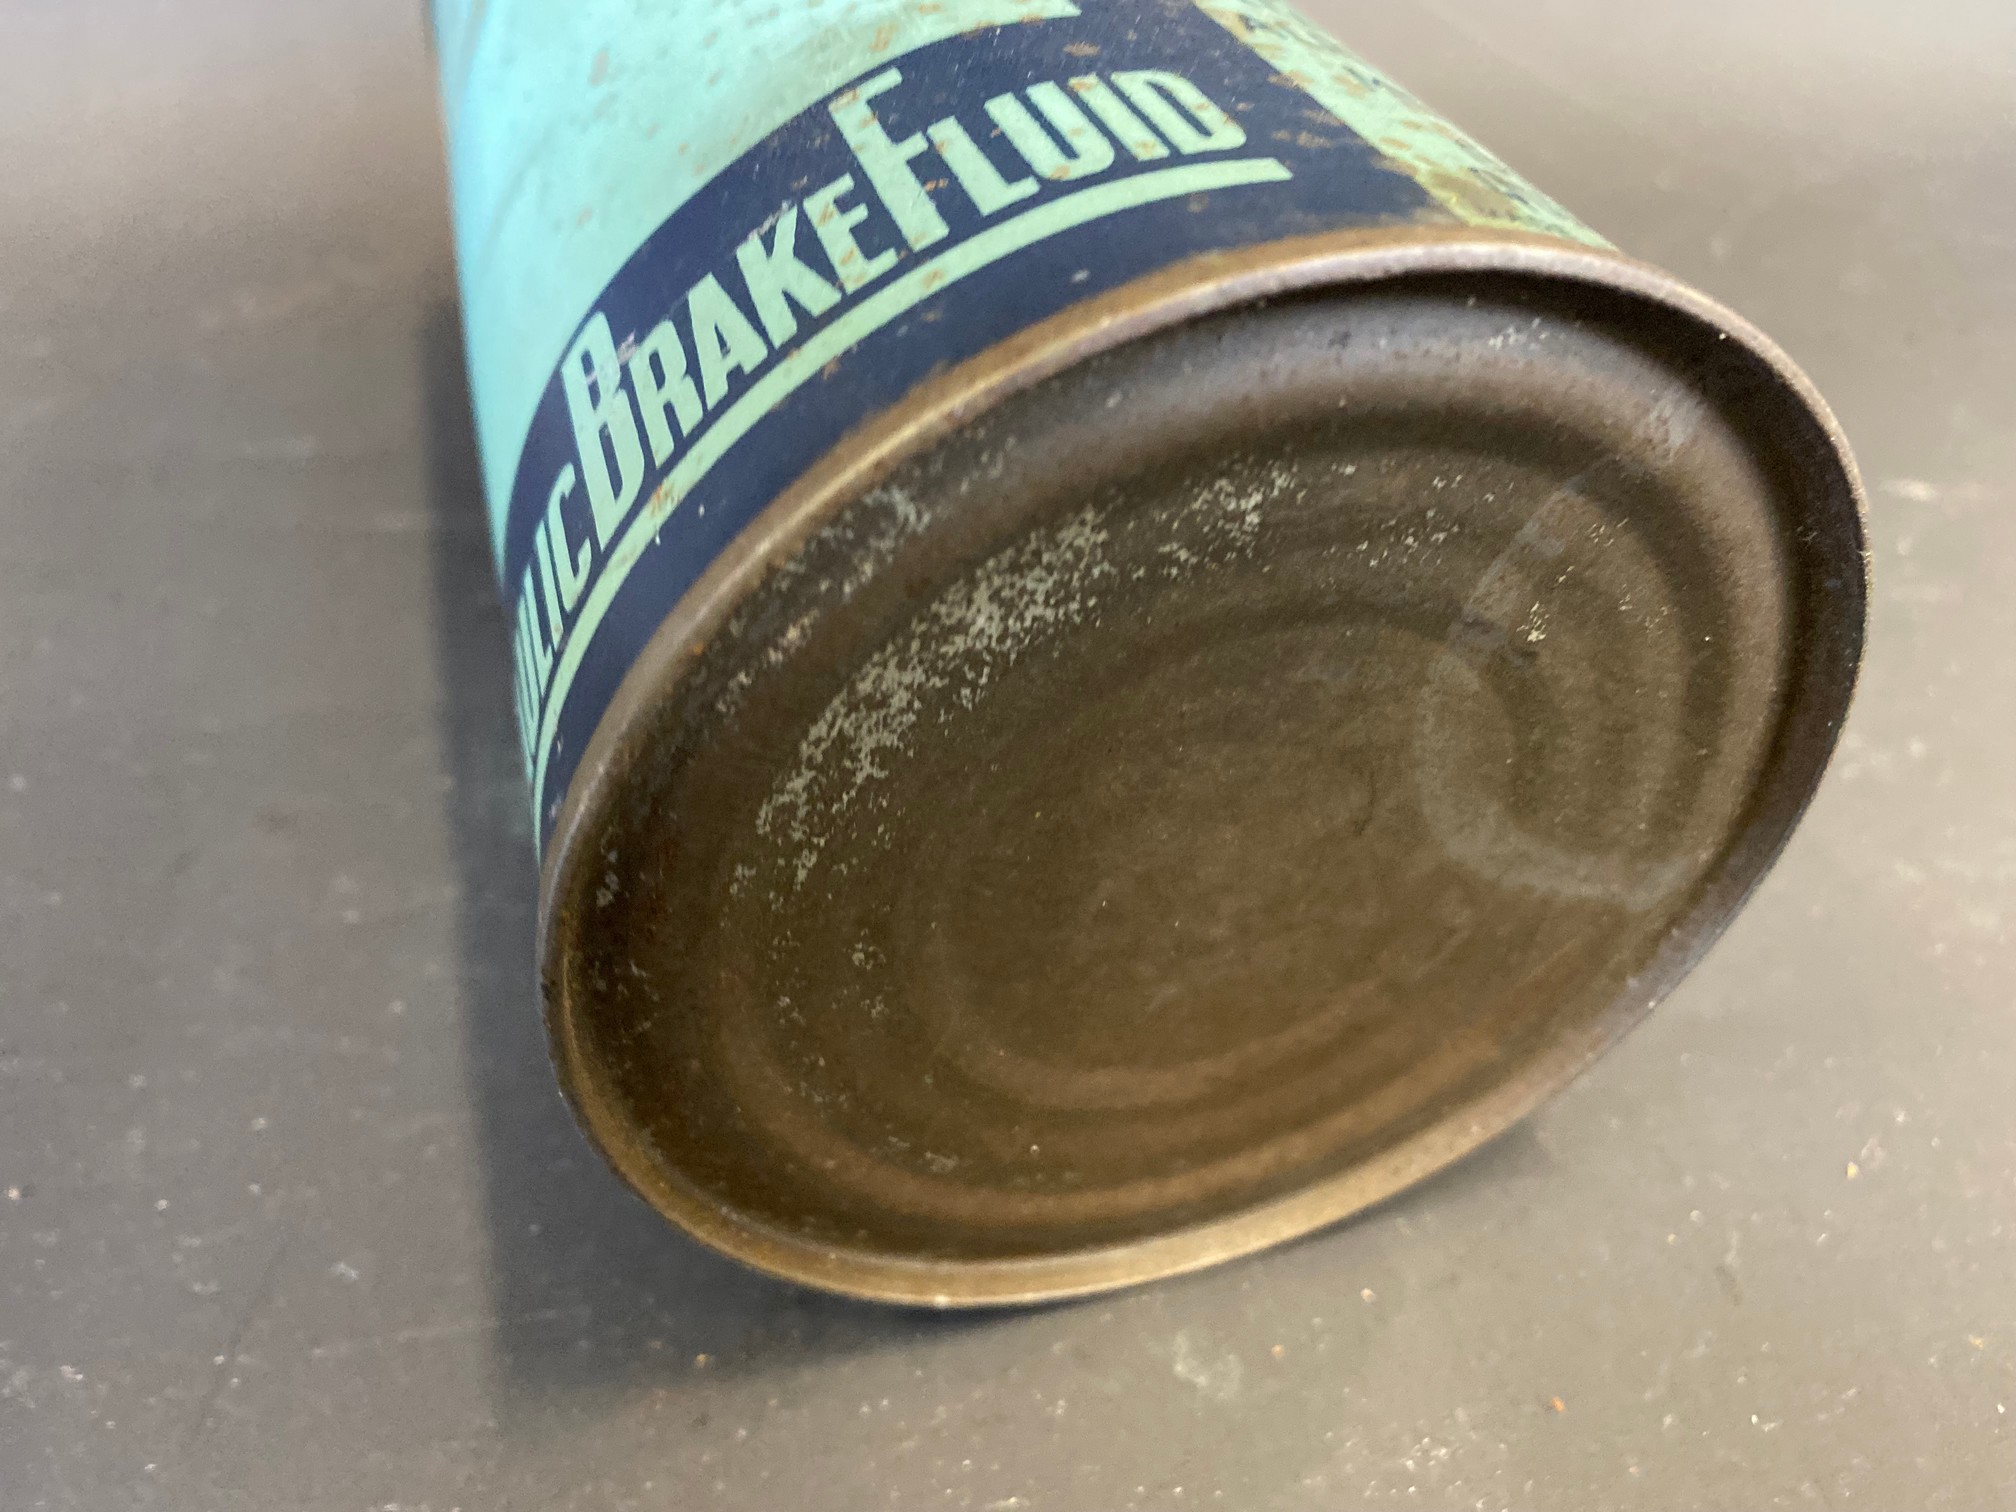 A BACO Hydraulic Brake Fluid cylindrical quart can. - Image 4 of 4